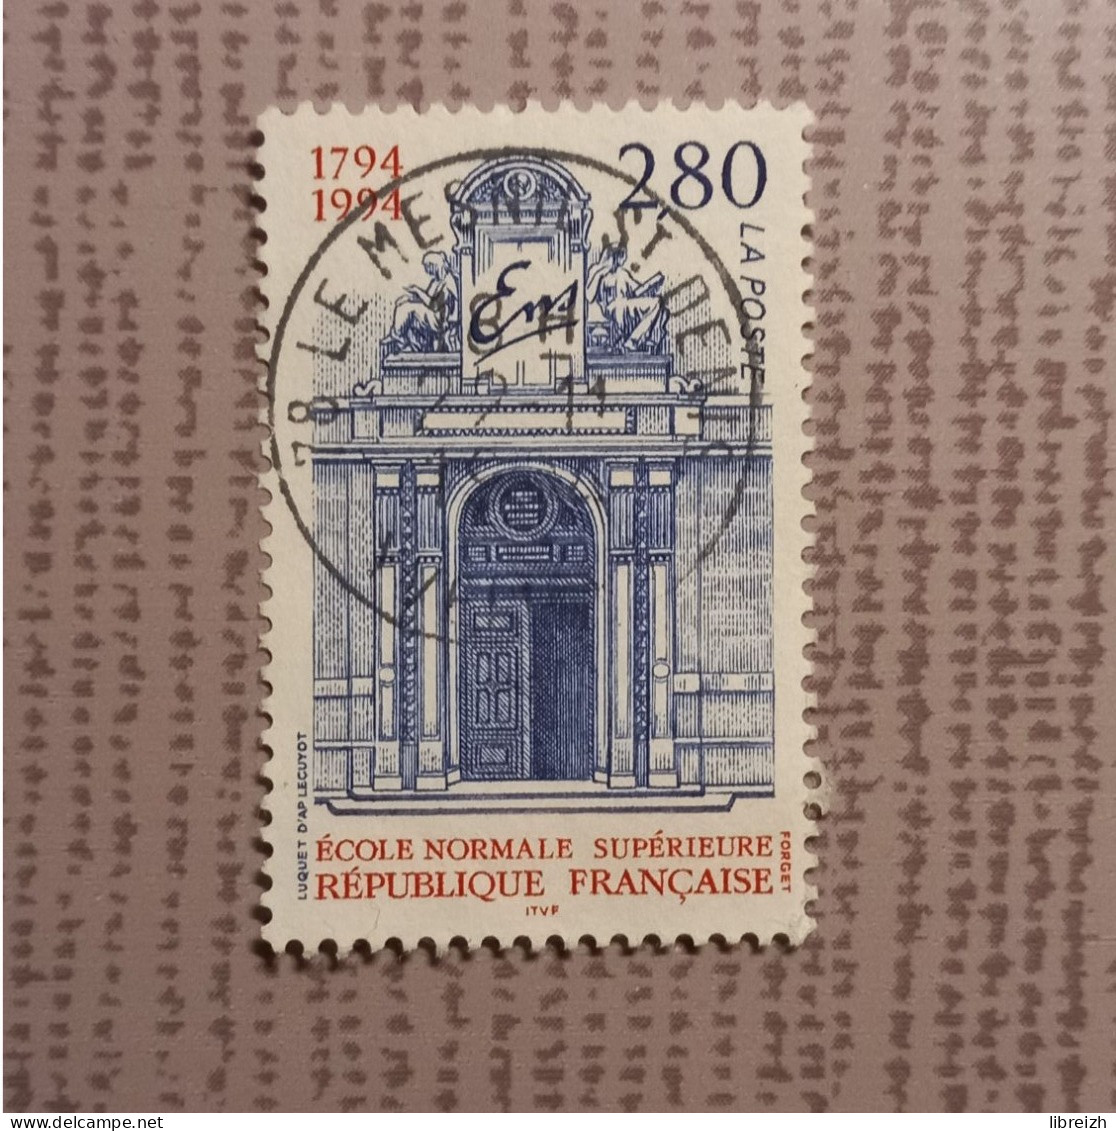 Ecole Normale Supérieure  N° 2907  Année 1994 - Used Stamps